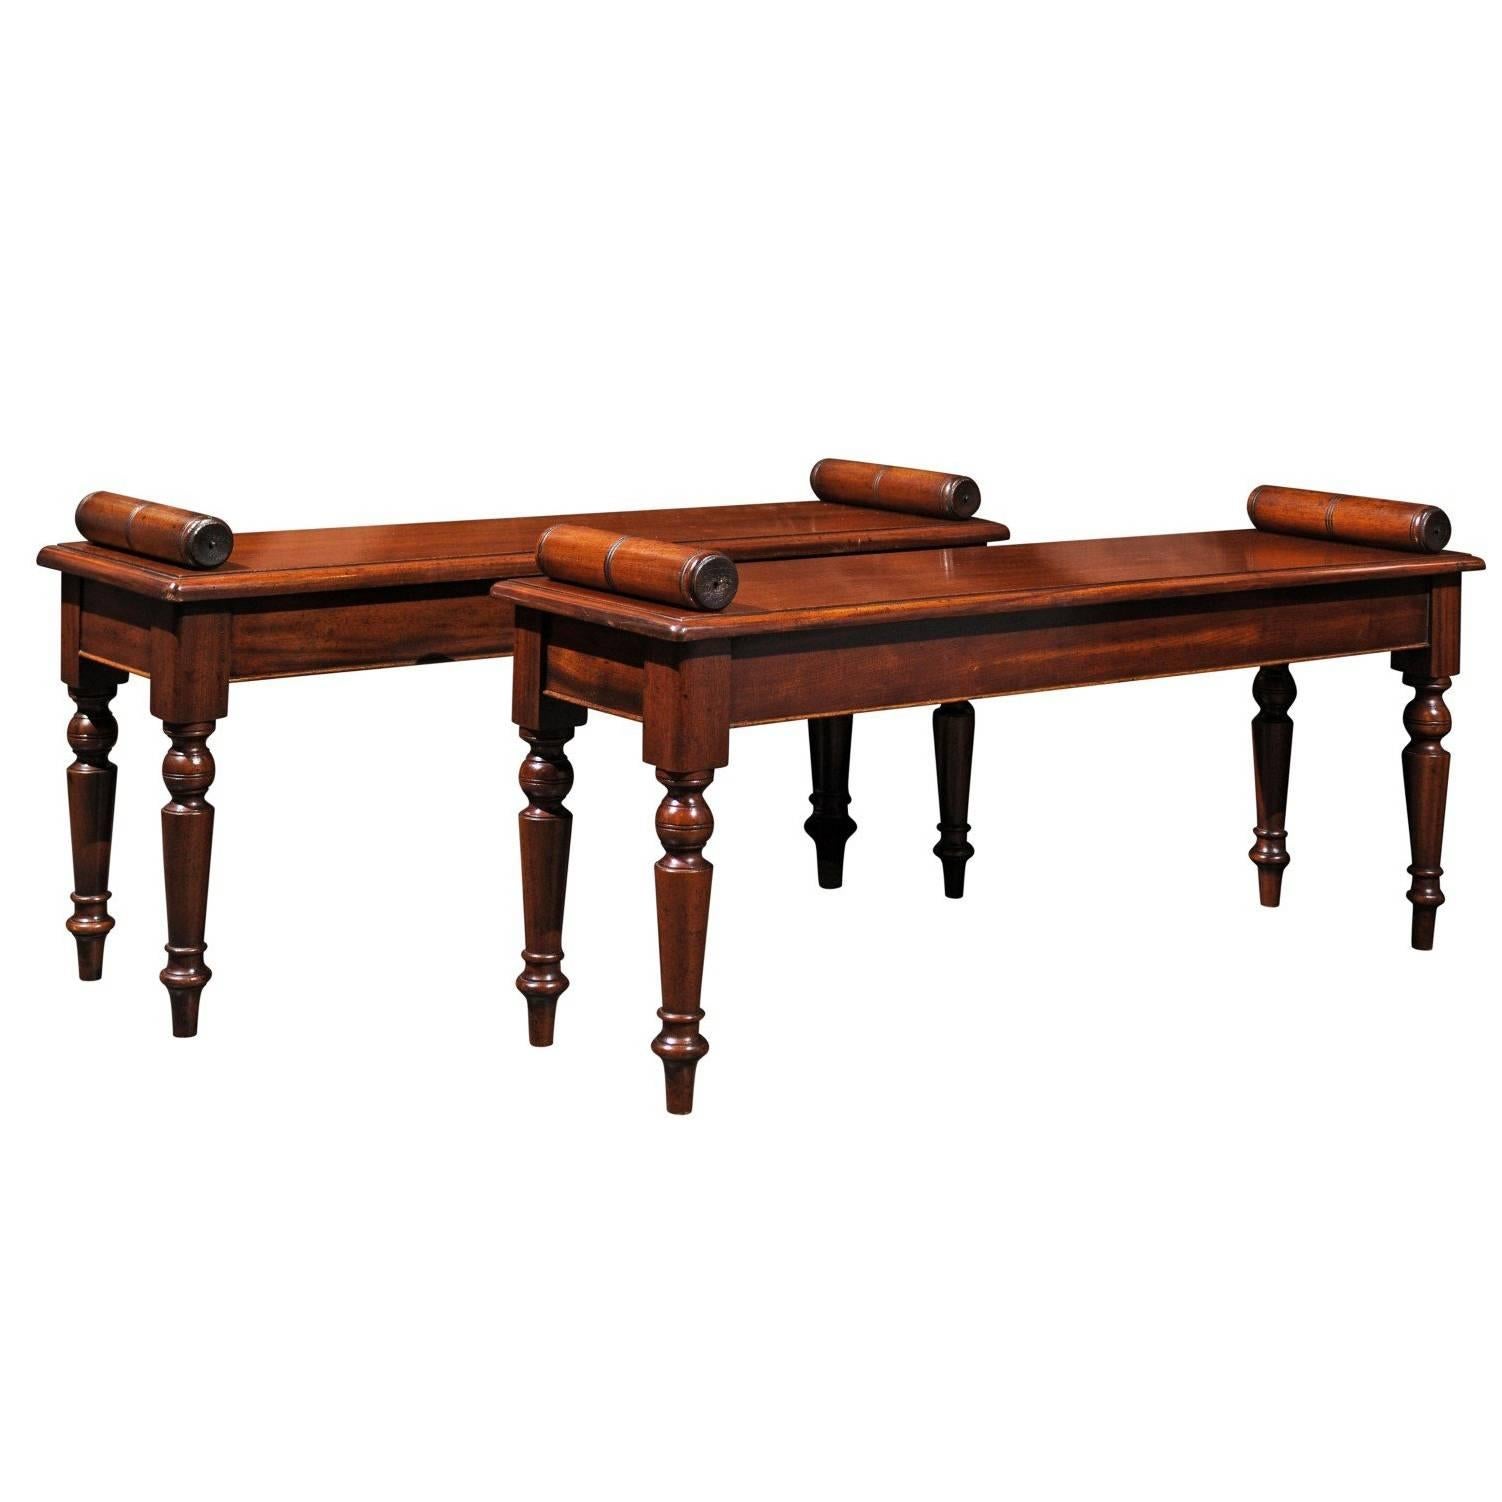 English Mid-19th Century Wooden Hall Benches with Cylindrical Armrests